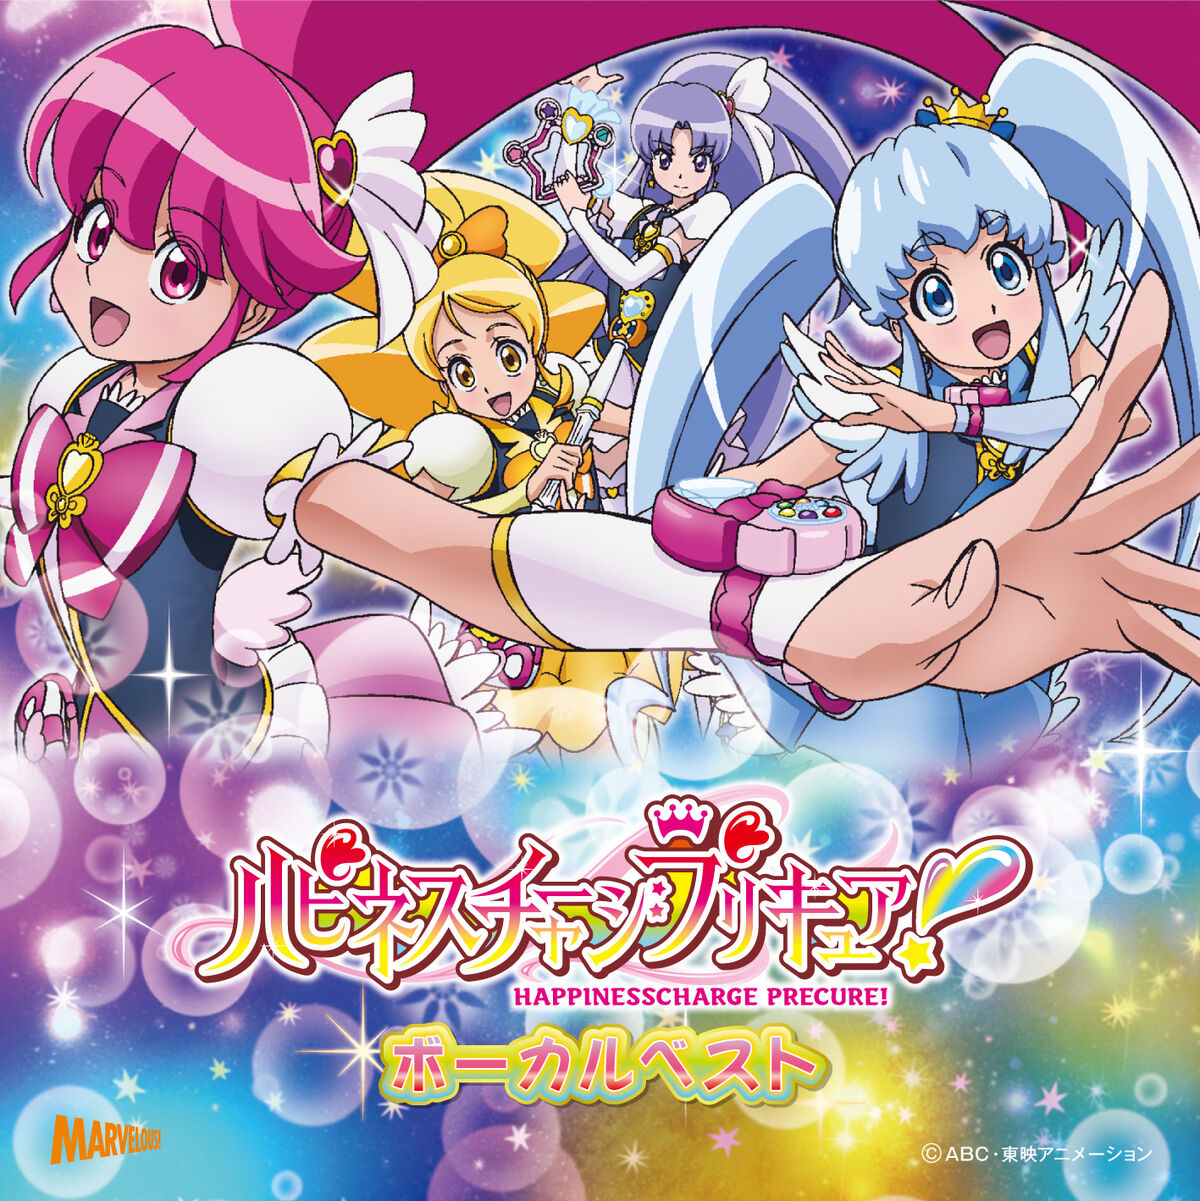 Happiness Charge Pretty Cure!: Episode List